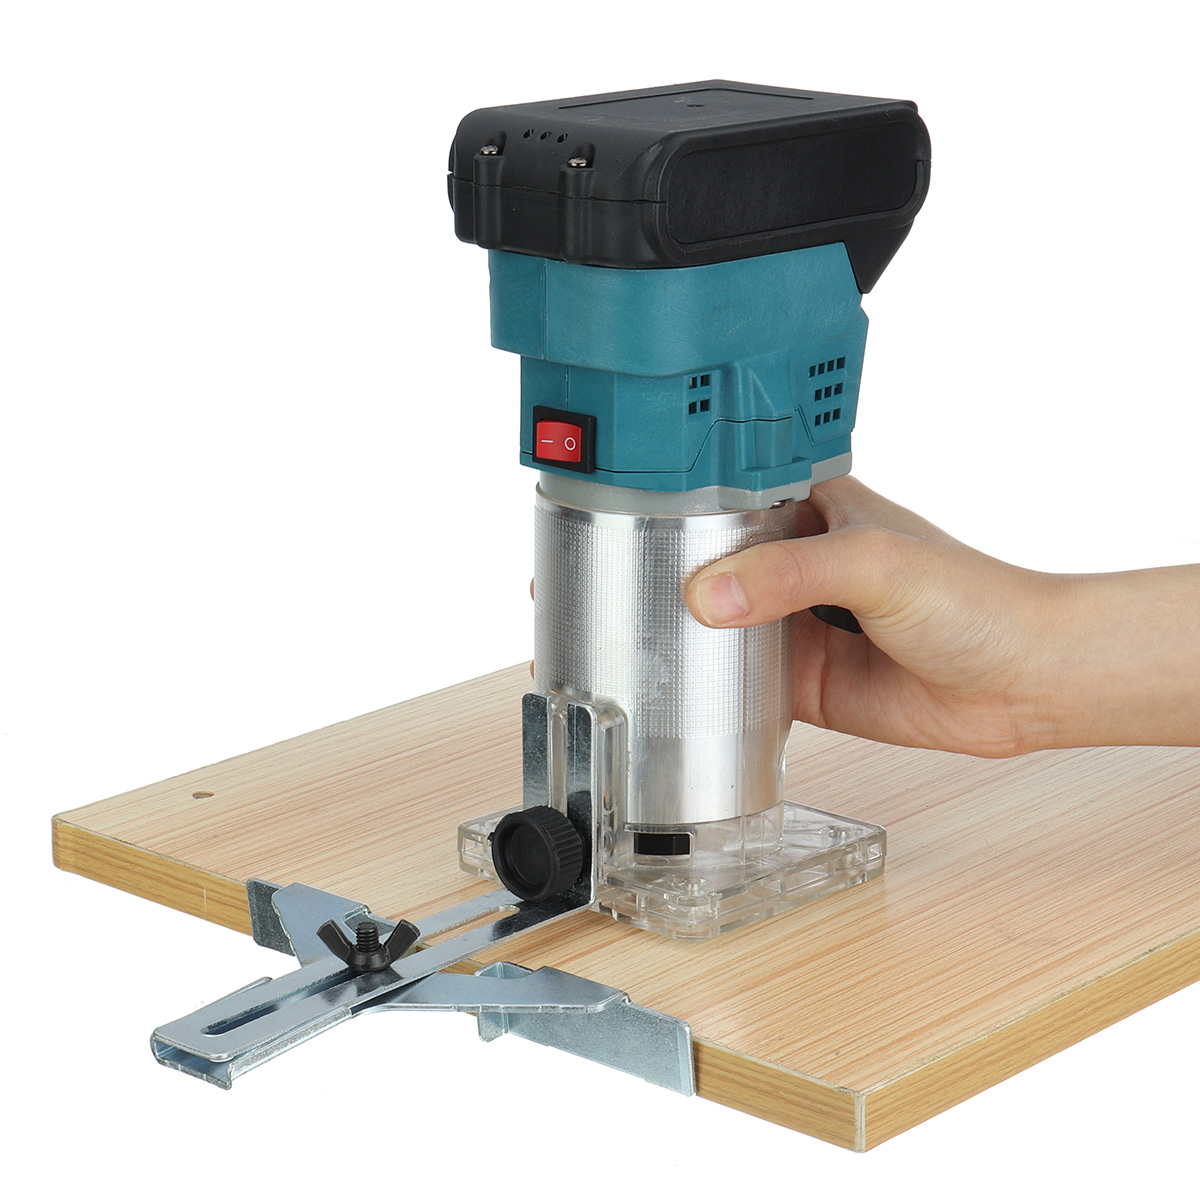 635mm-Cordless-Electric-Trimmer-Compact-Palm-Router-Corded-Woodworking-Trimming-Edge-Guide-Wood-W-12-1854950-7